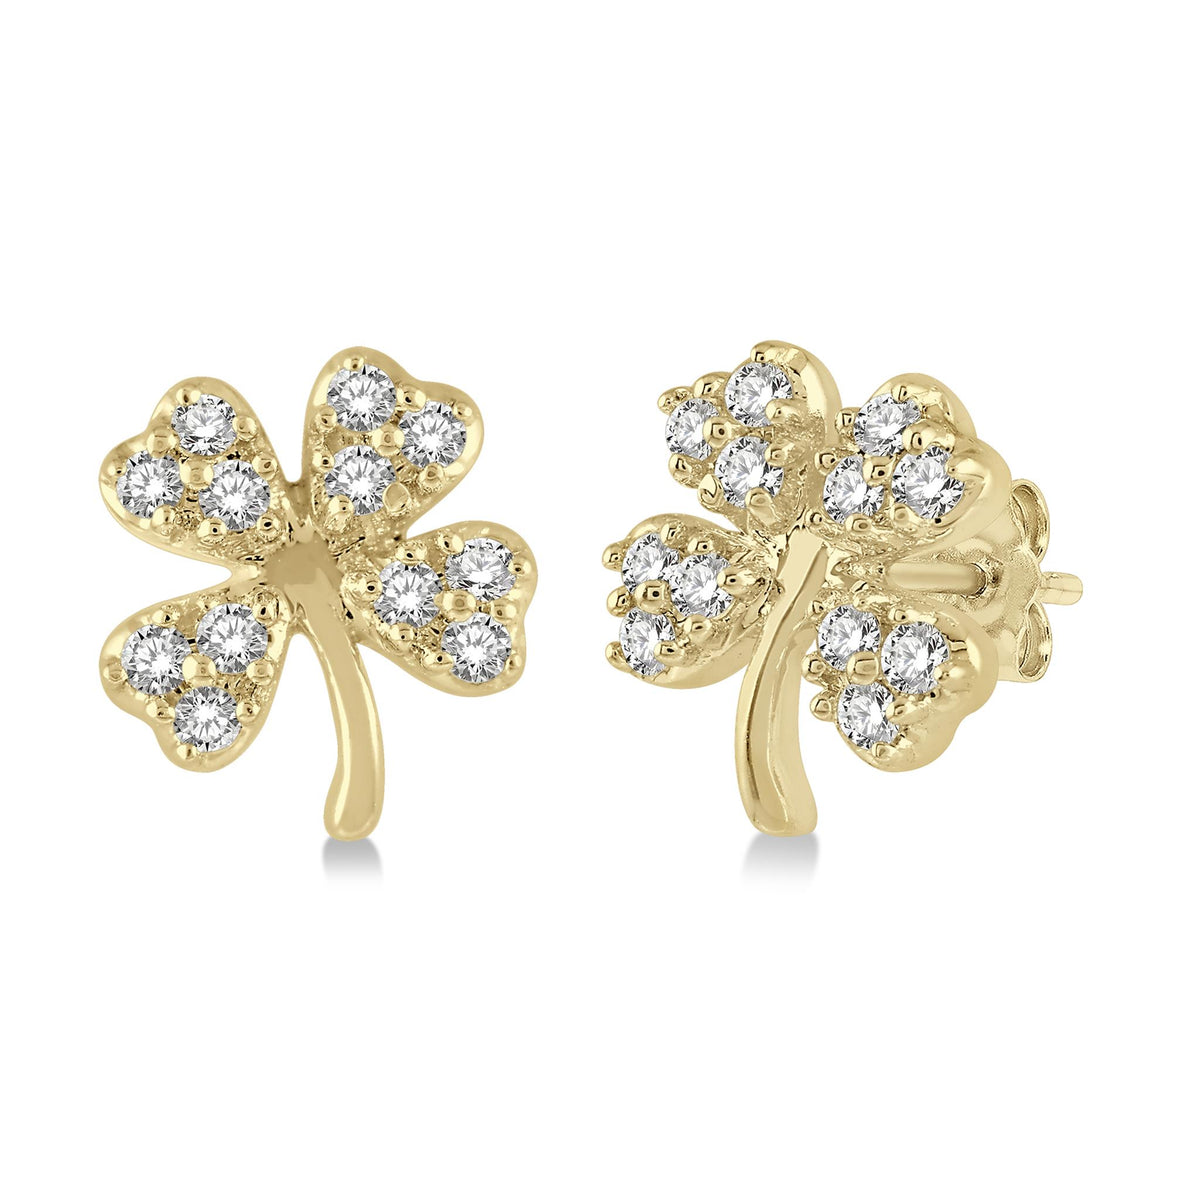 Lasker Petites-10Kt Yellow Gold Clover Stud Earrings with 0.10cttw Natural Diamonds